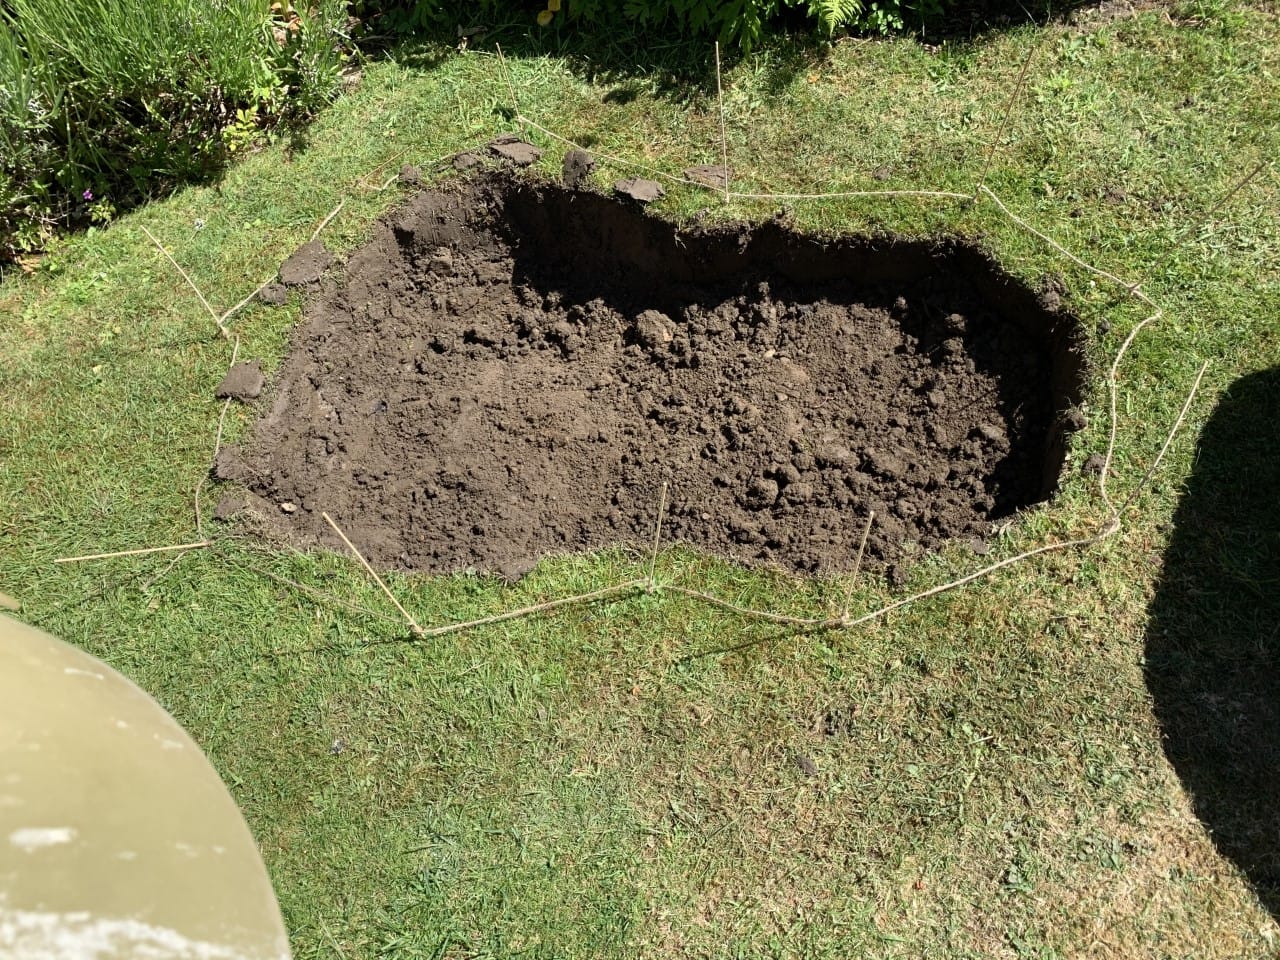 How To Build A Wildlife Pond: The Top Layer Of Soil Is Removed